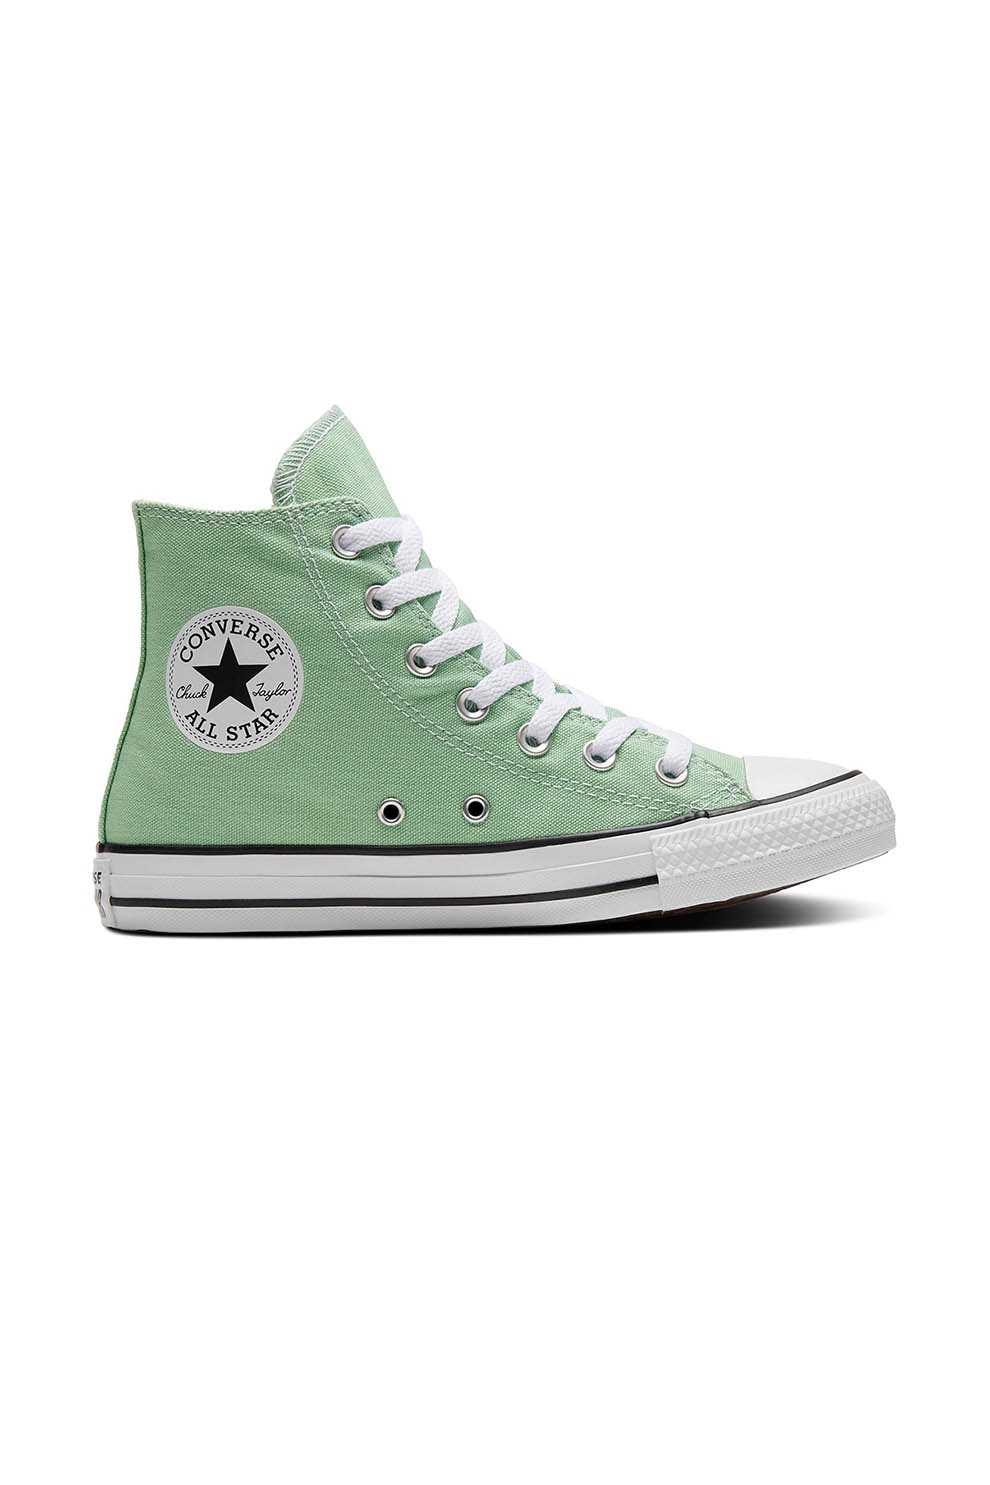 Replenishment Cook a meal Possession Converse, Tenisi unisex mid-high Chuck Taylor All Star, Verde pal, 5.5 -  eMAG.ro